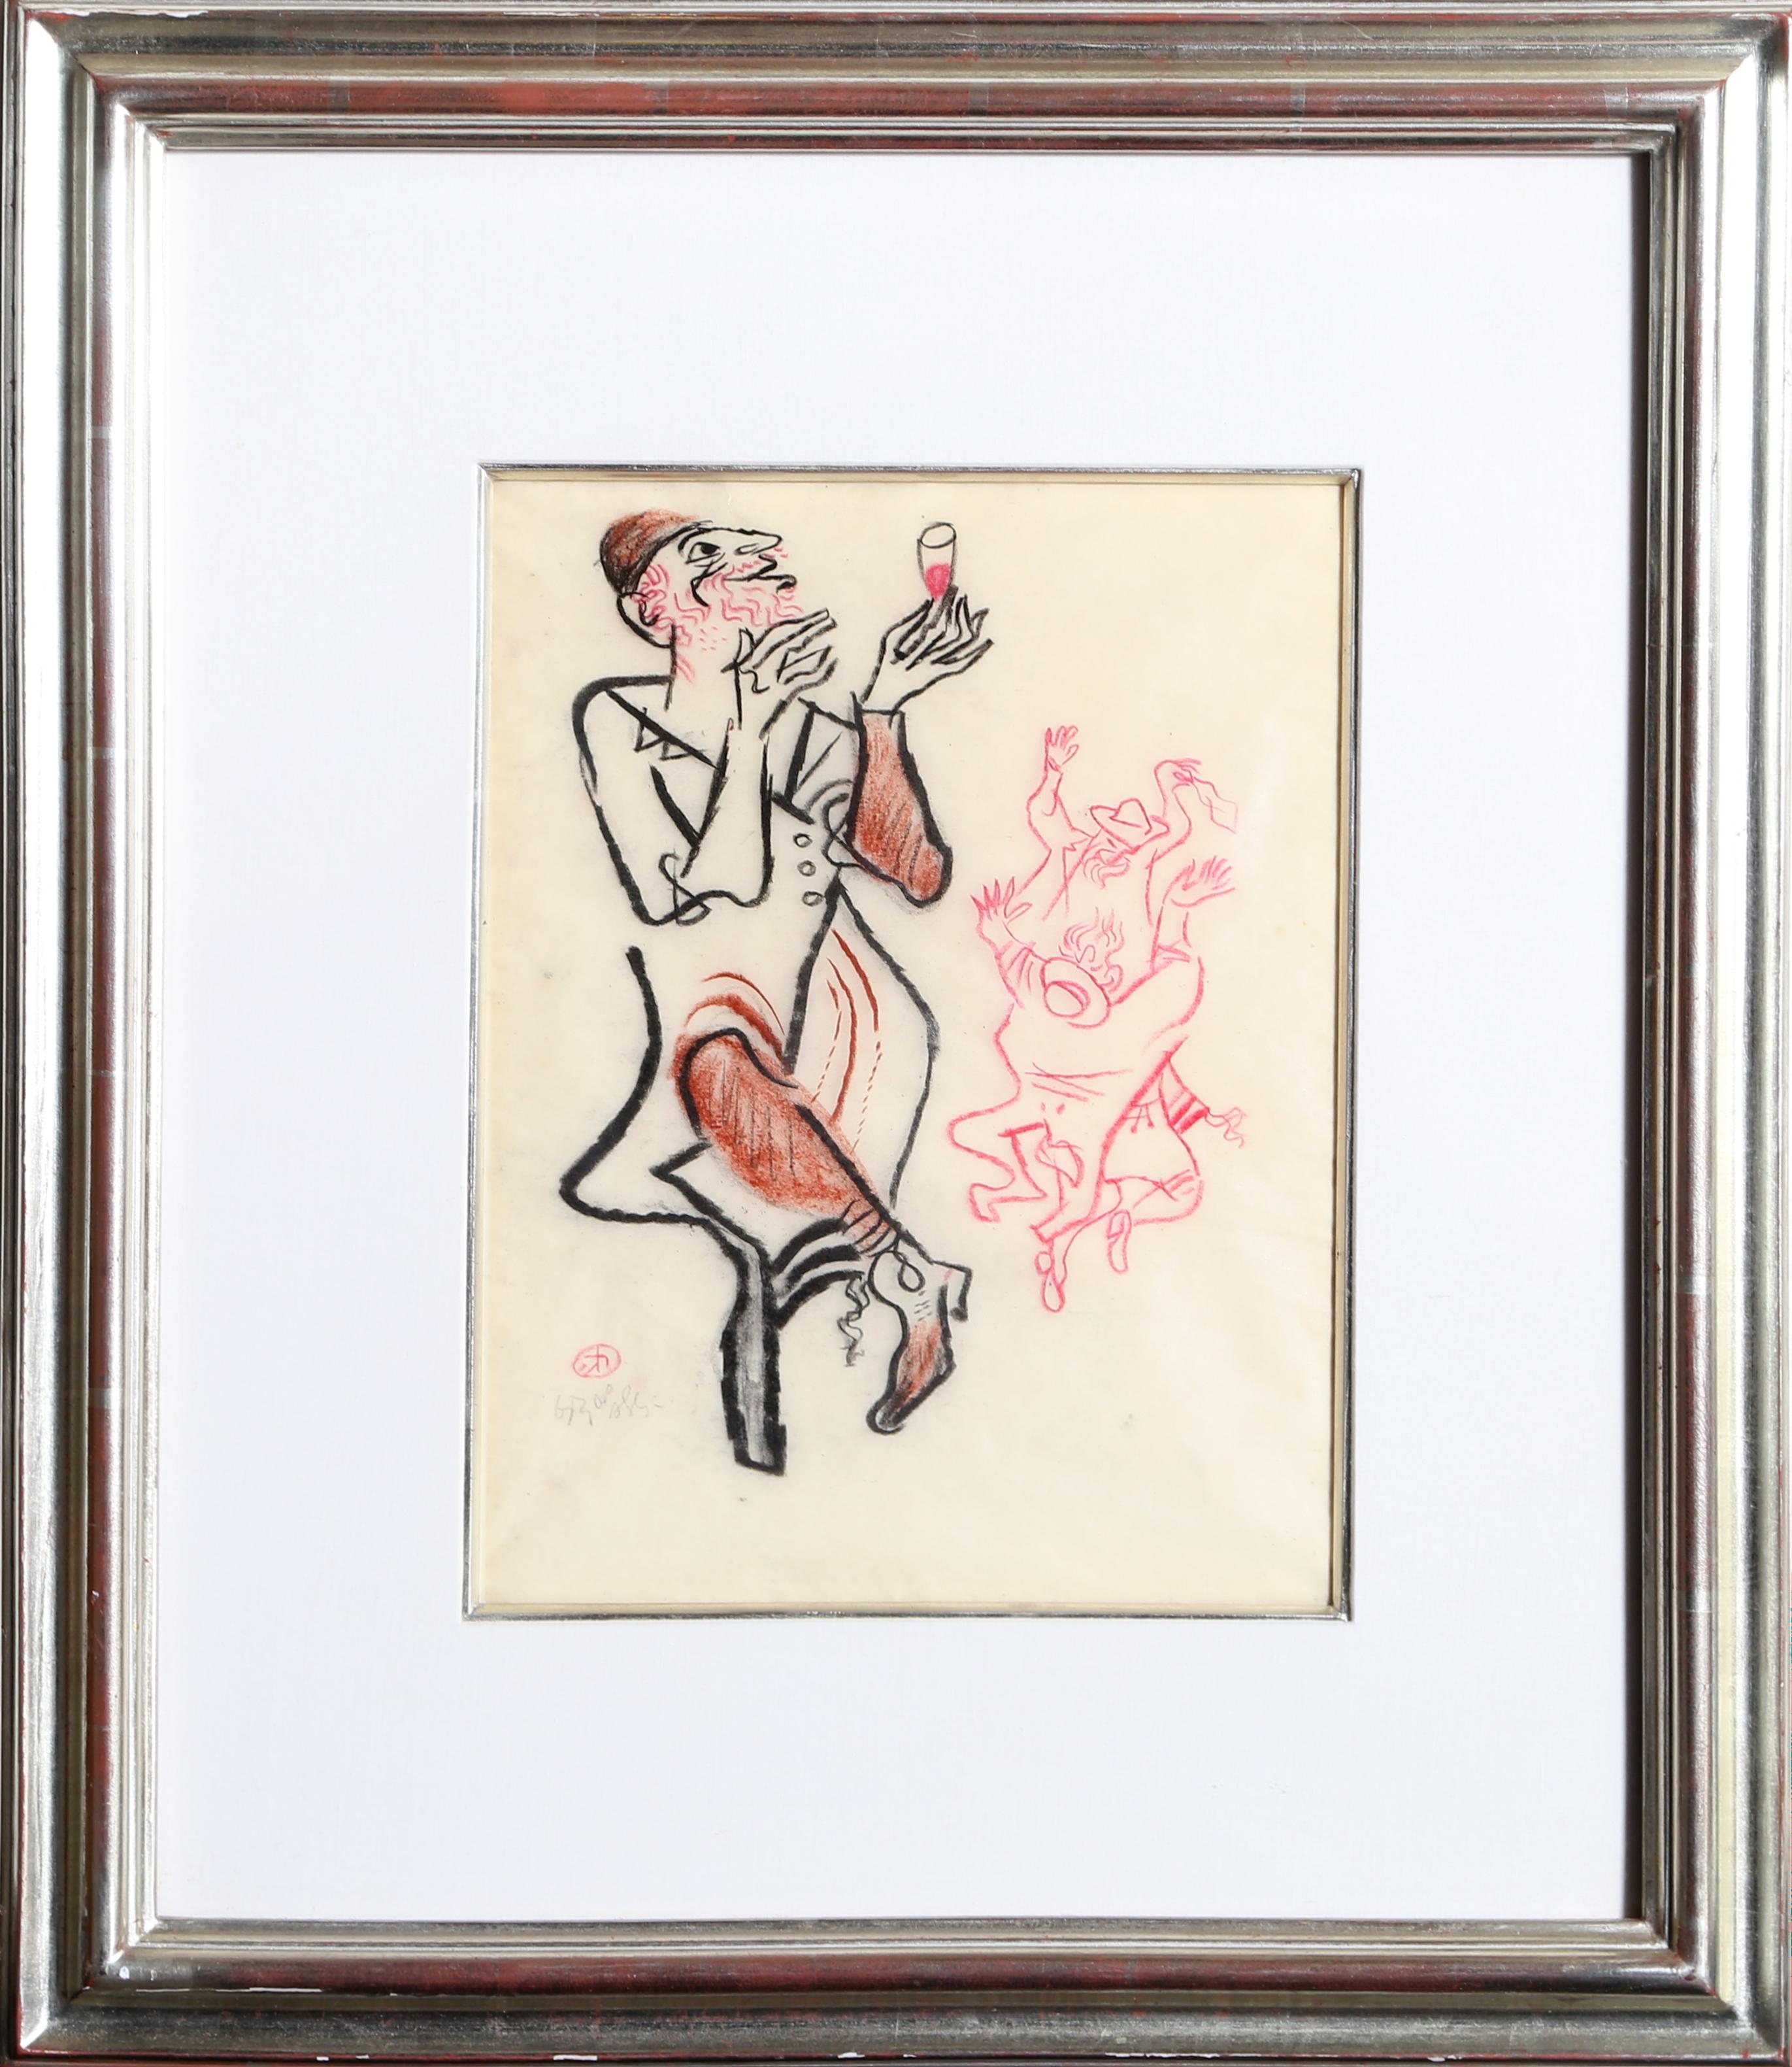 A Man and his Wine, Wax Crayon Drawing by William Gropper